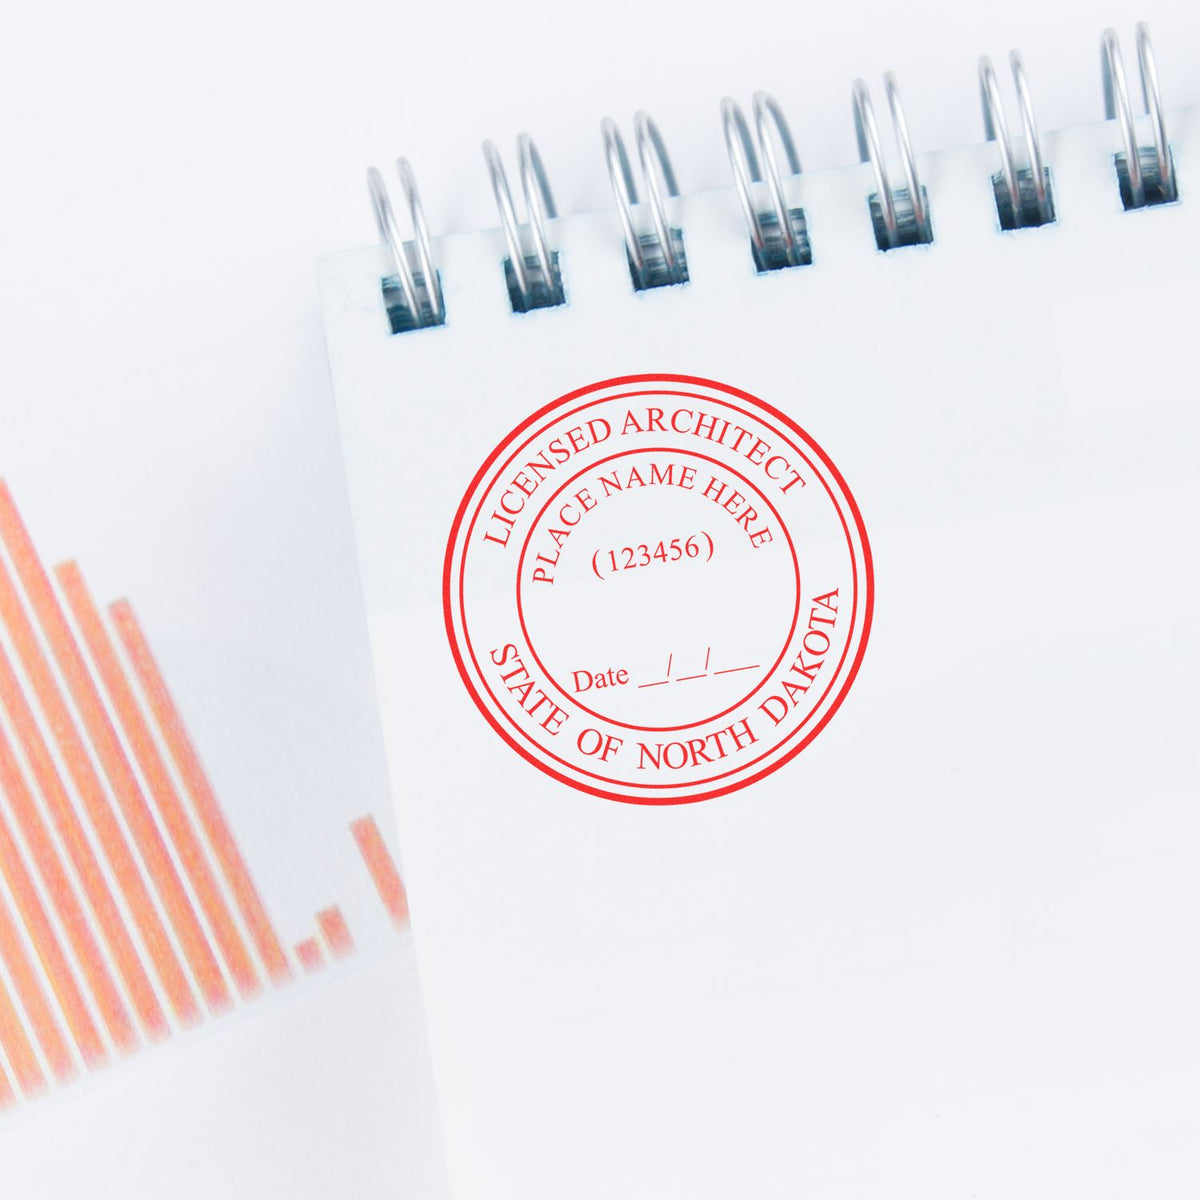 The Slim Pre-Inked North Dakota Architect Seal Stamp stamp impression comes to life with a crisp, detailed photo on paper - showcasing true professional quality.